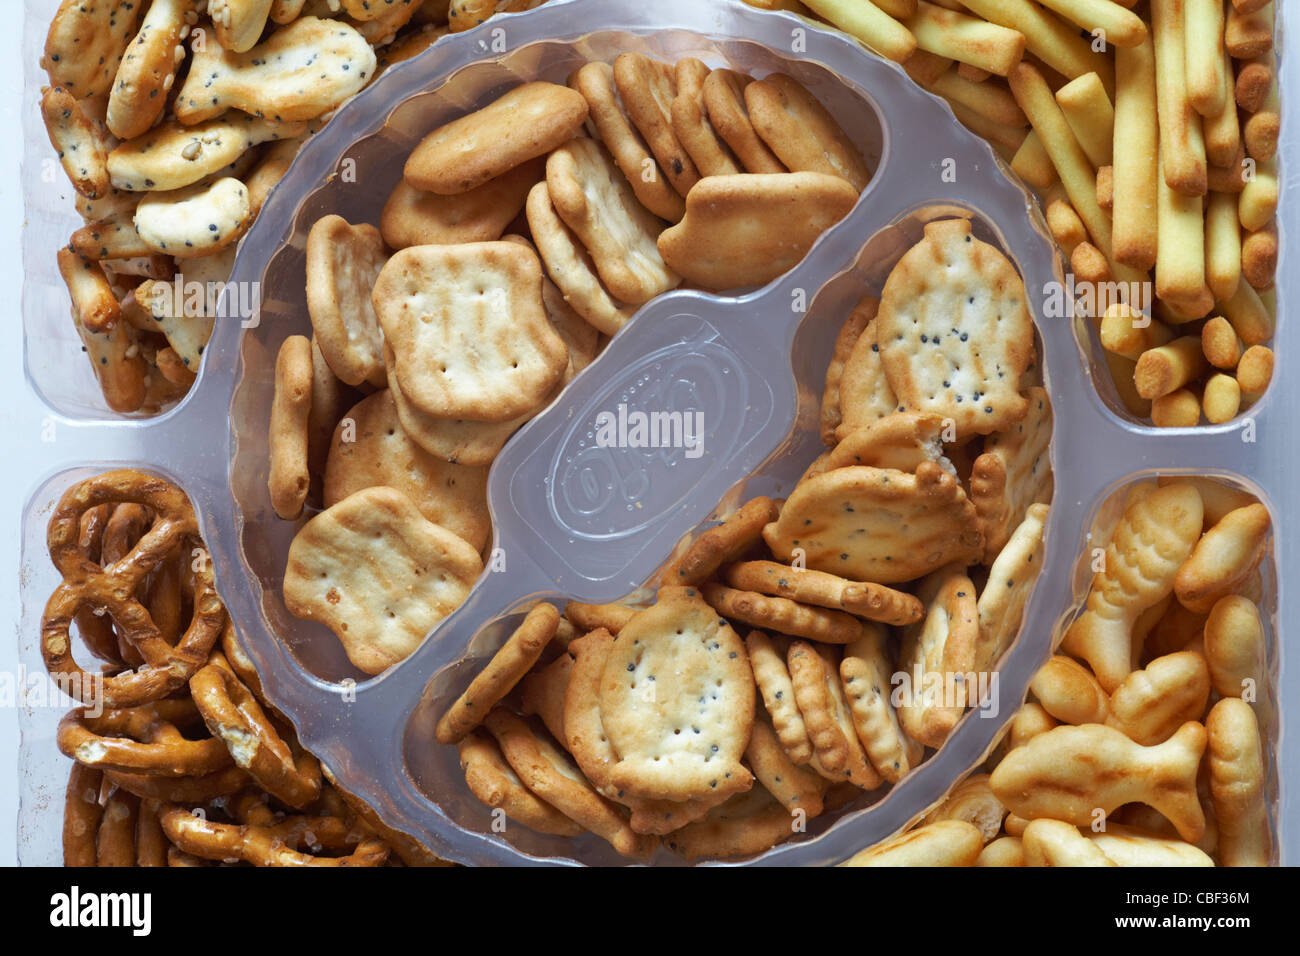 Packet of Maxi mix Chio nibbles in plastic container Stock Photo - Alamy